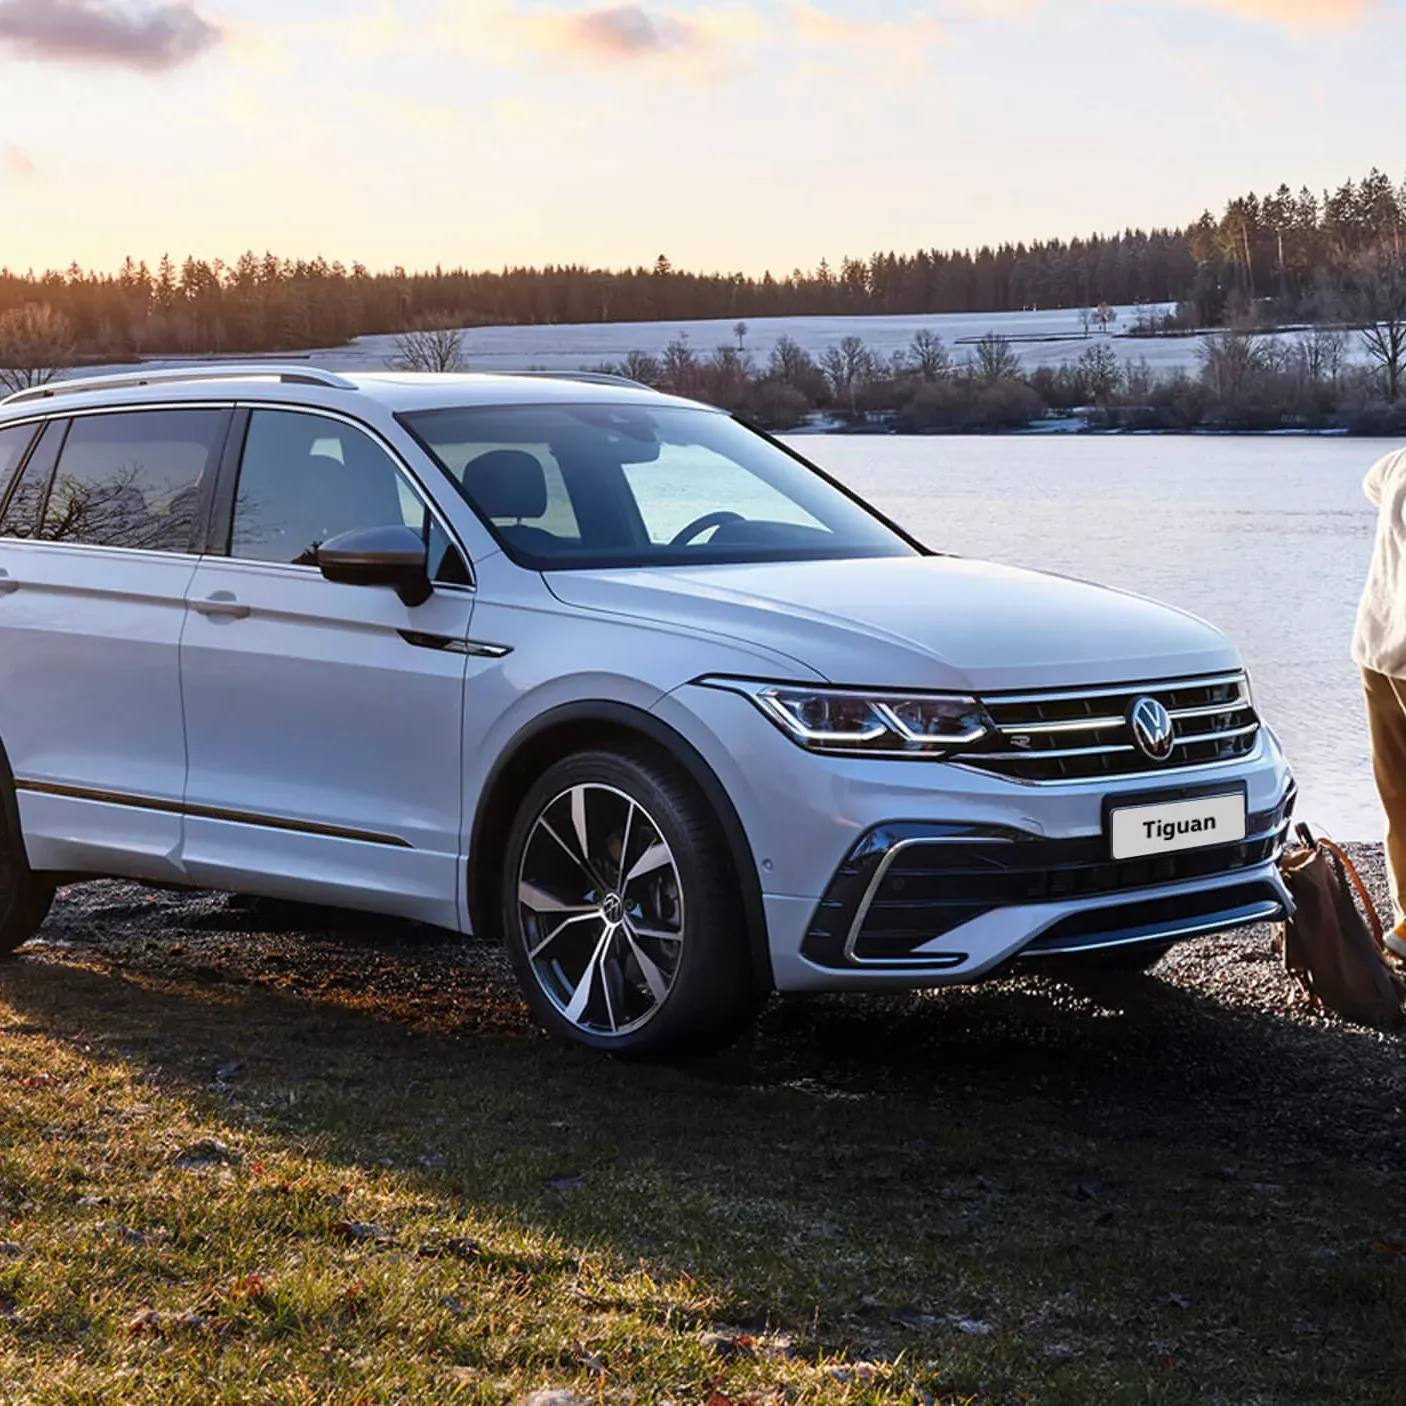 White Volkswagen Tiguan parked in front of a snowy field